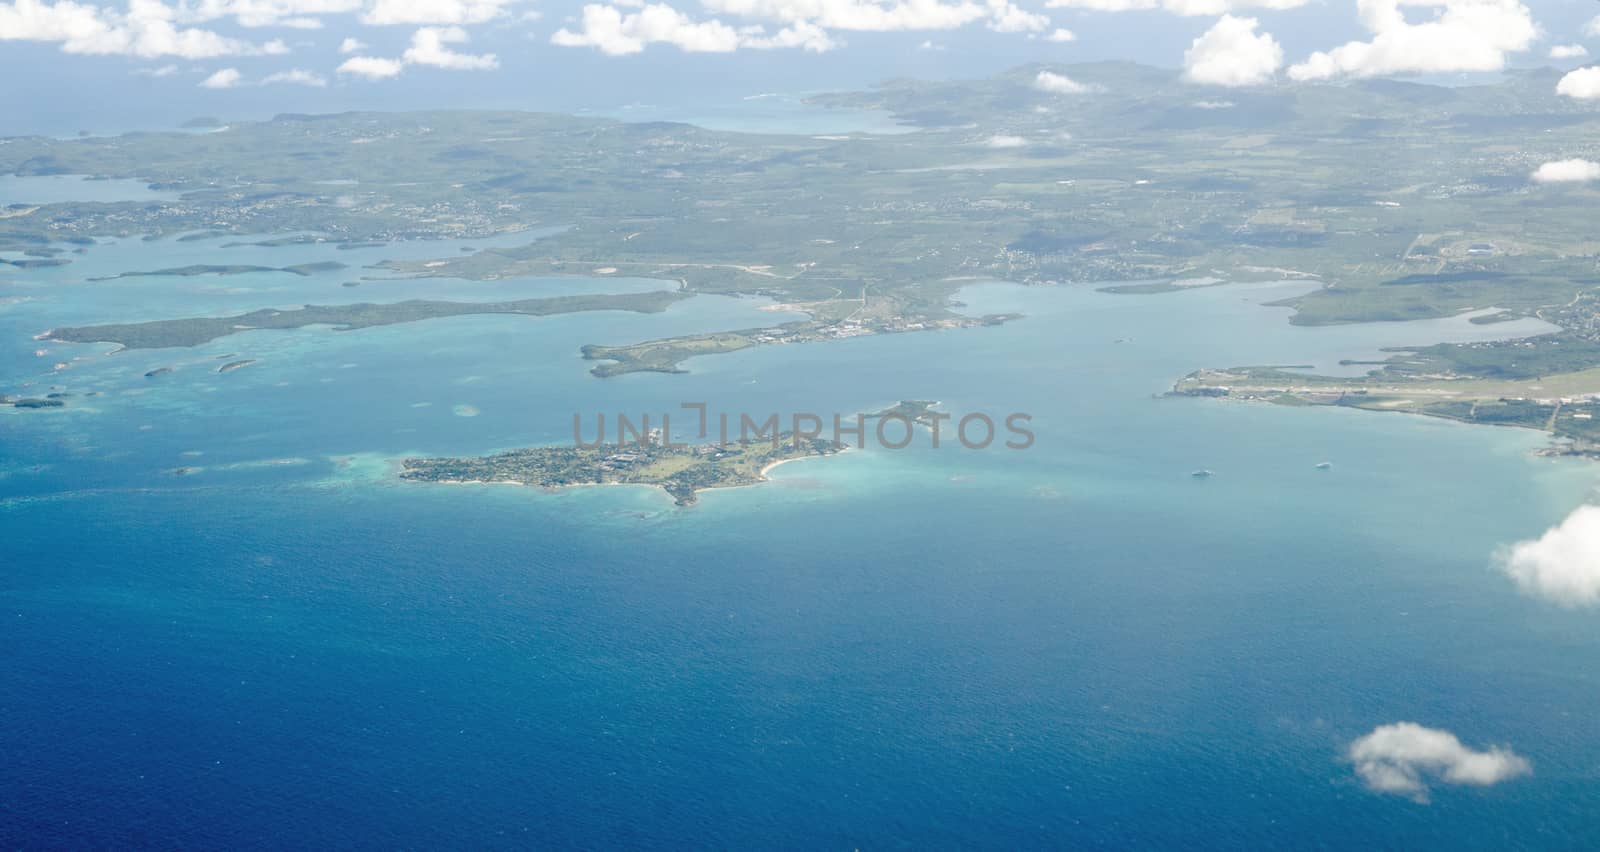 Aerial view of Antigua with the landmark Long Island, Fitches Creek Bay and Parnham Harbour with the promentary of Crabbs further away.  Sunny January afternoon.